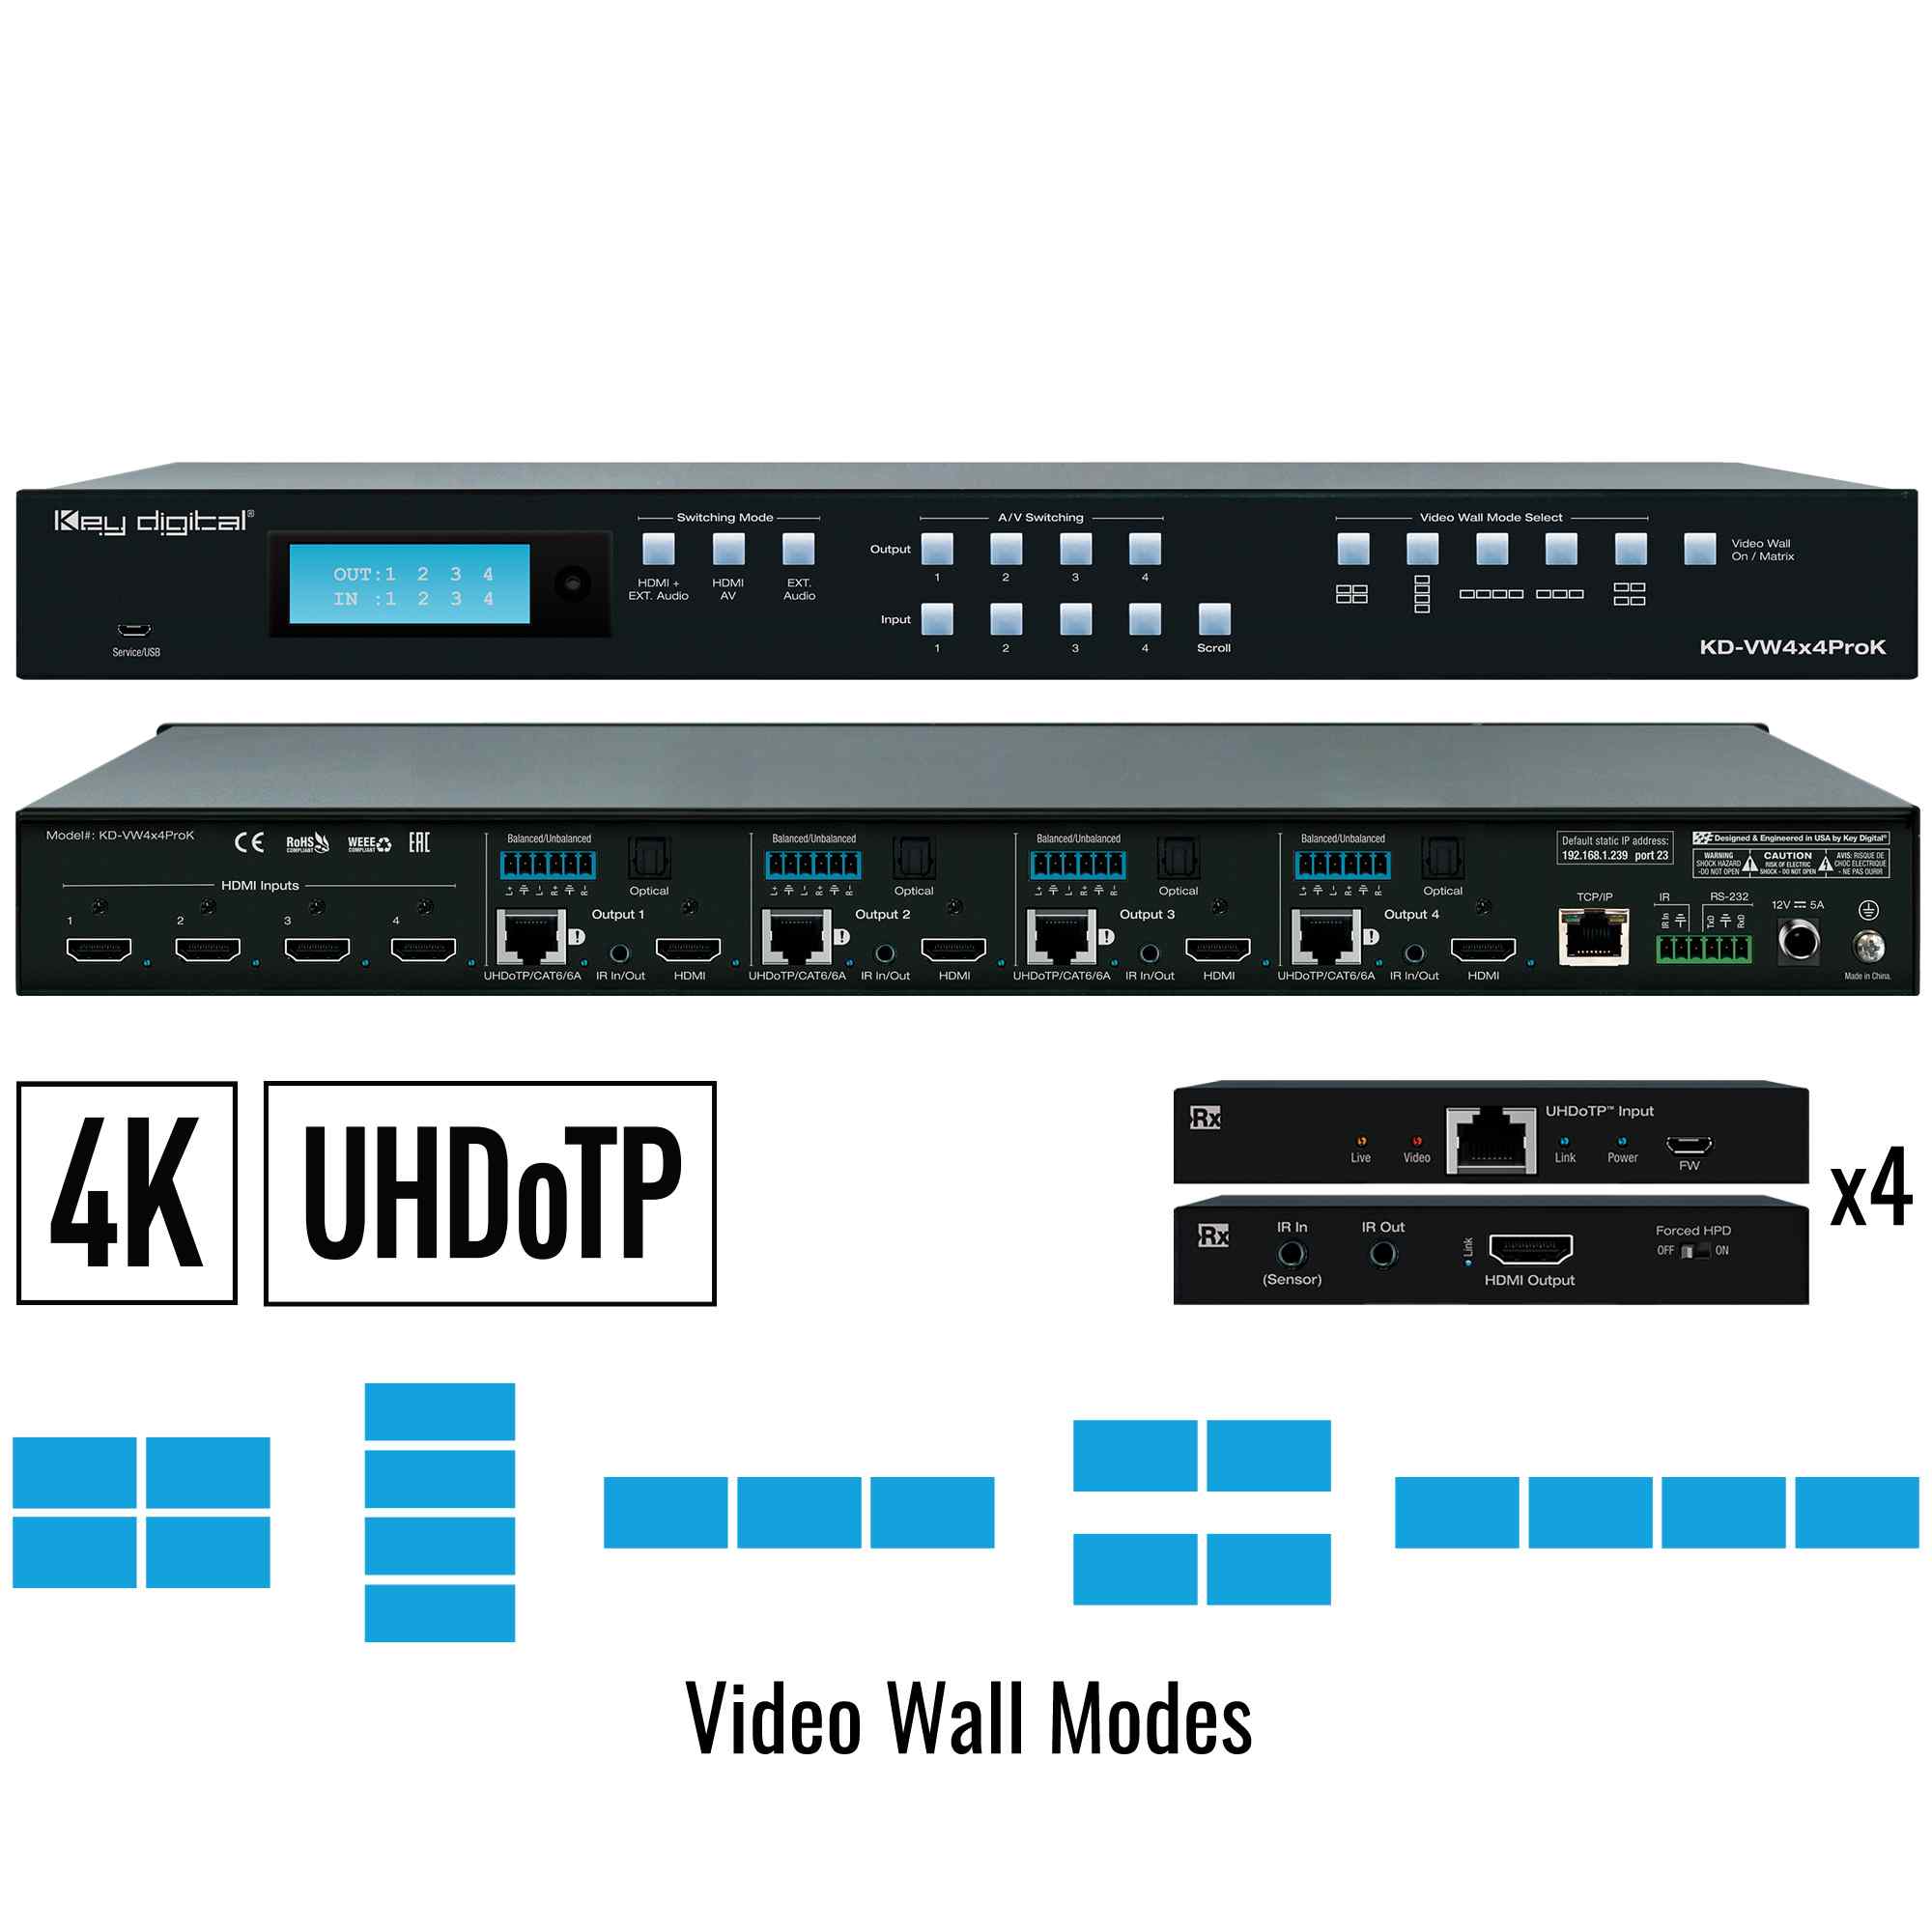 Thumbnail of KD video matrix switcher front and rear